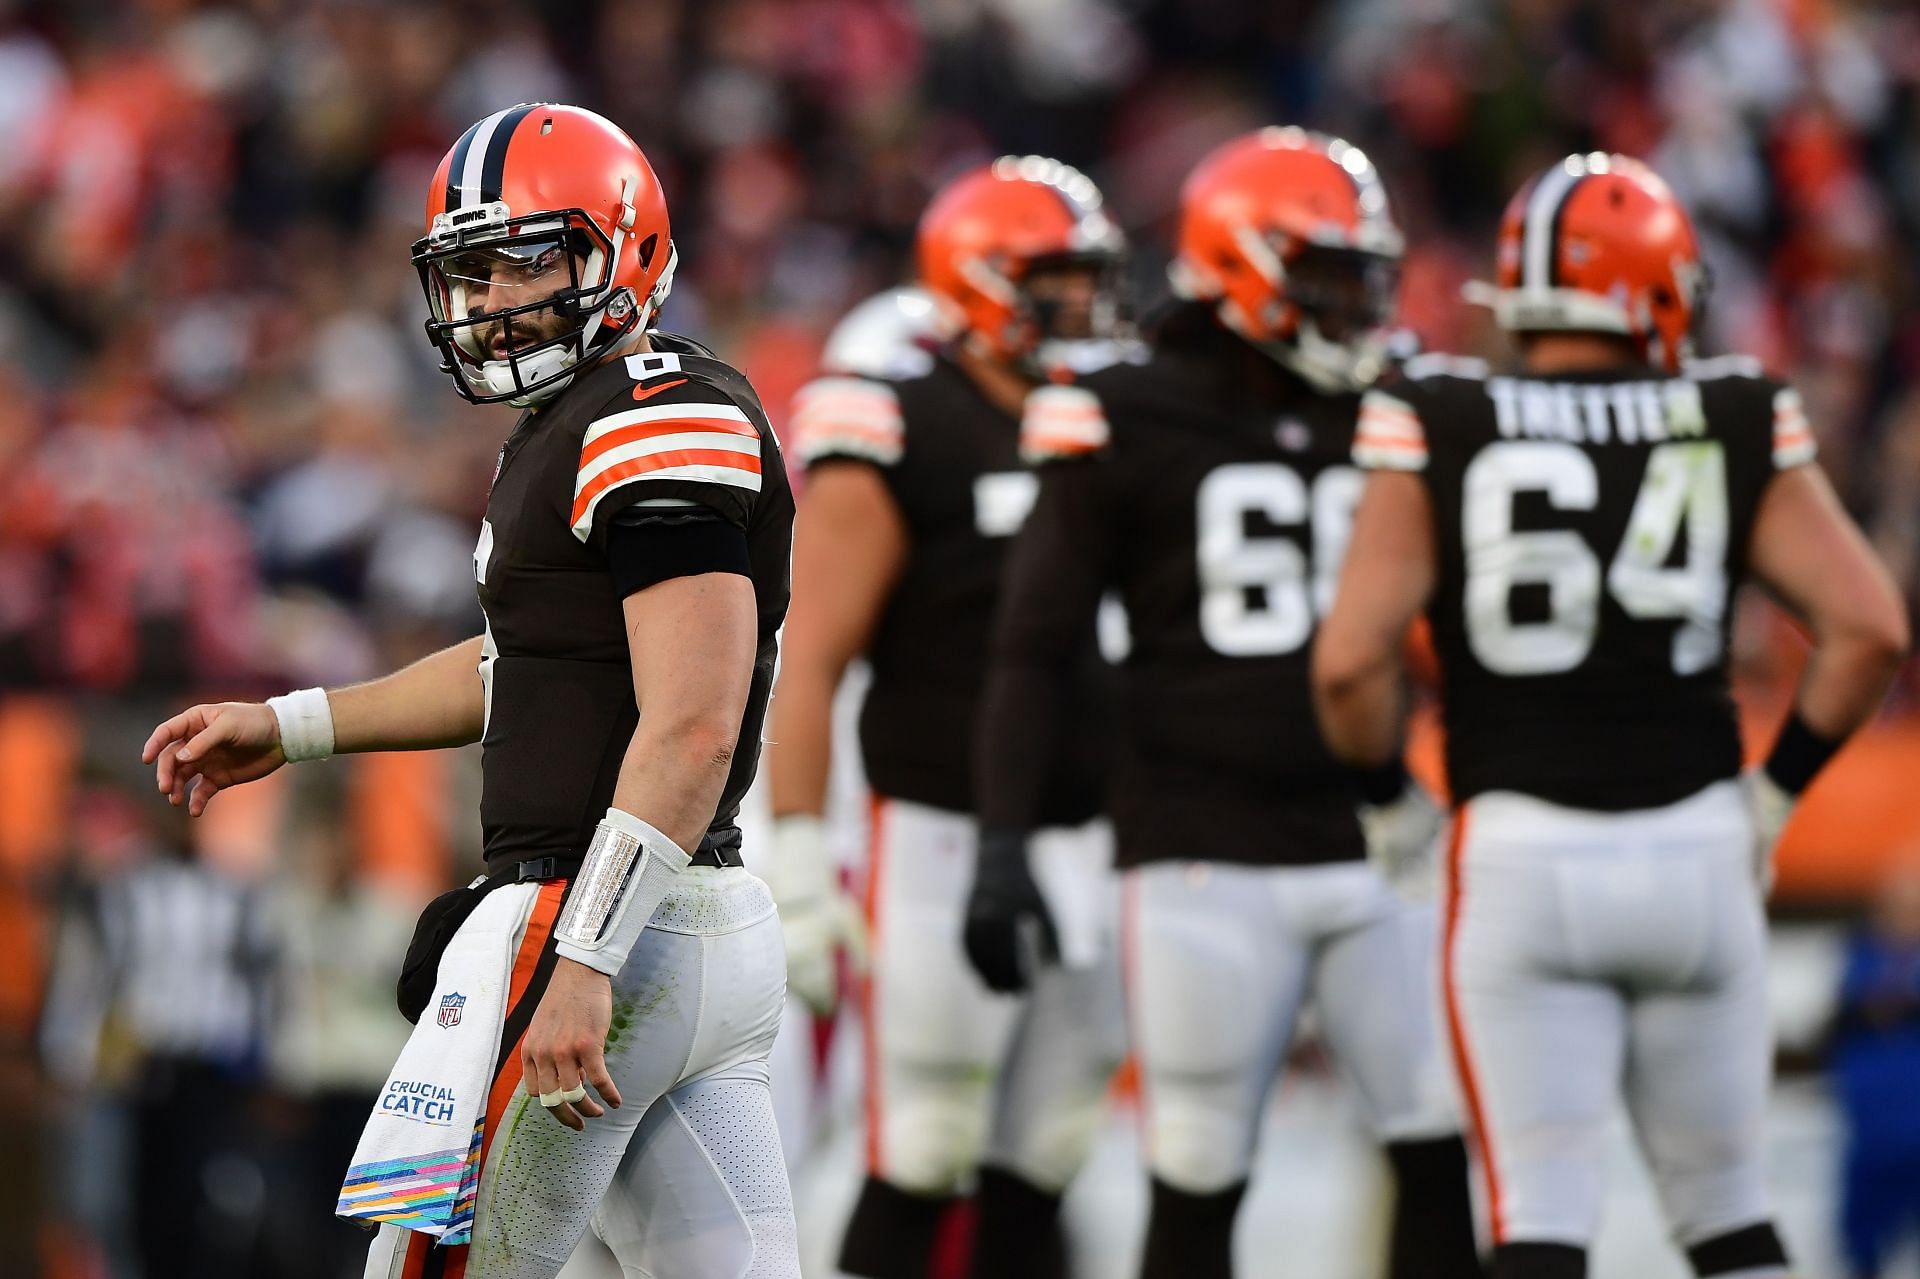 On Thursday, Baker Mayfield kept seeing the huddle from a distance